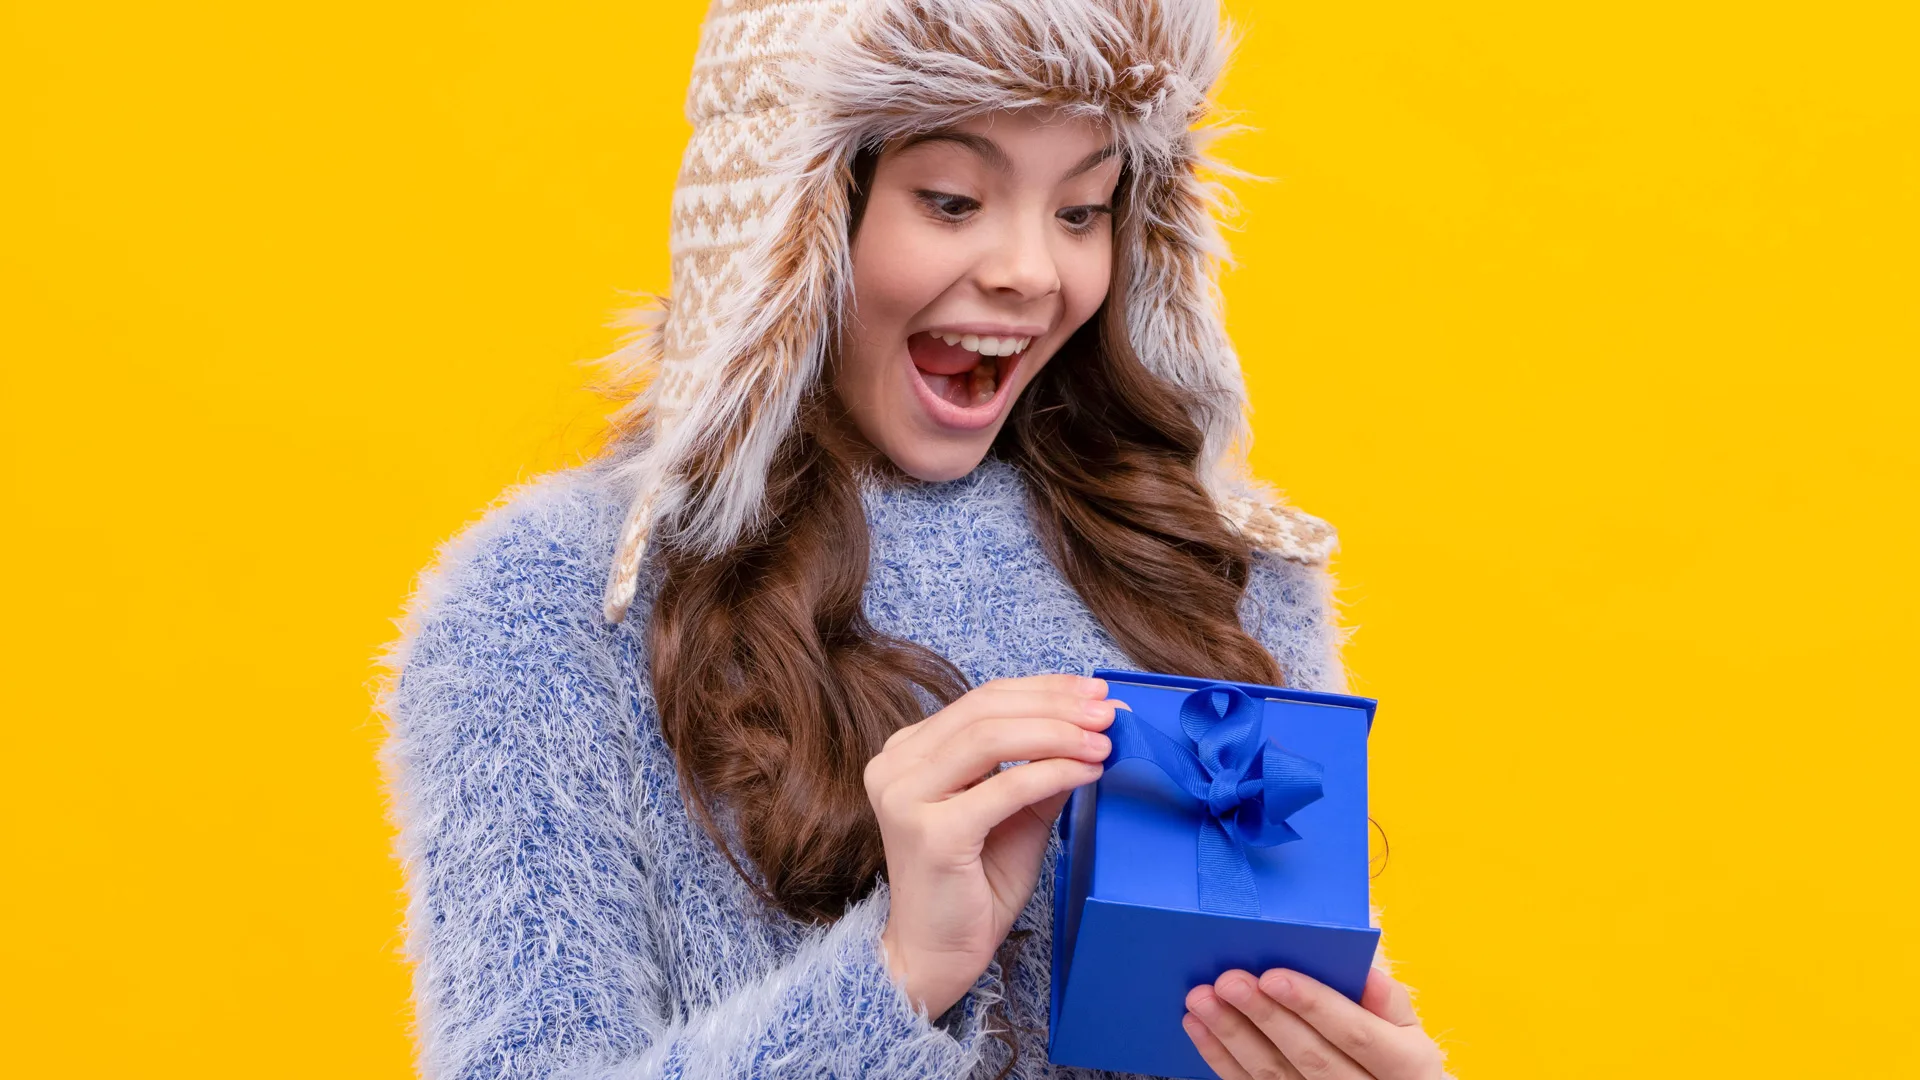 Photograph of a girl wearing a furry hat and jumper opening a present on a yellow background